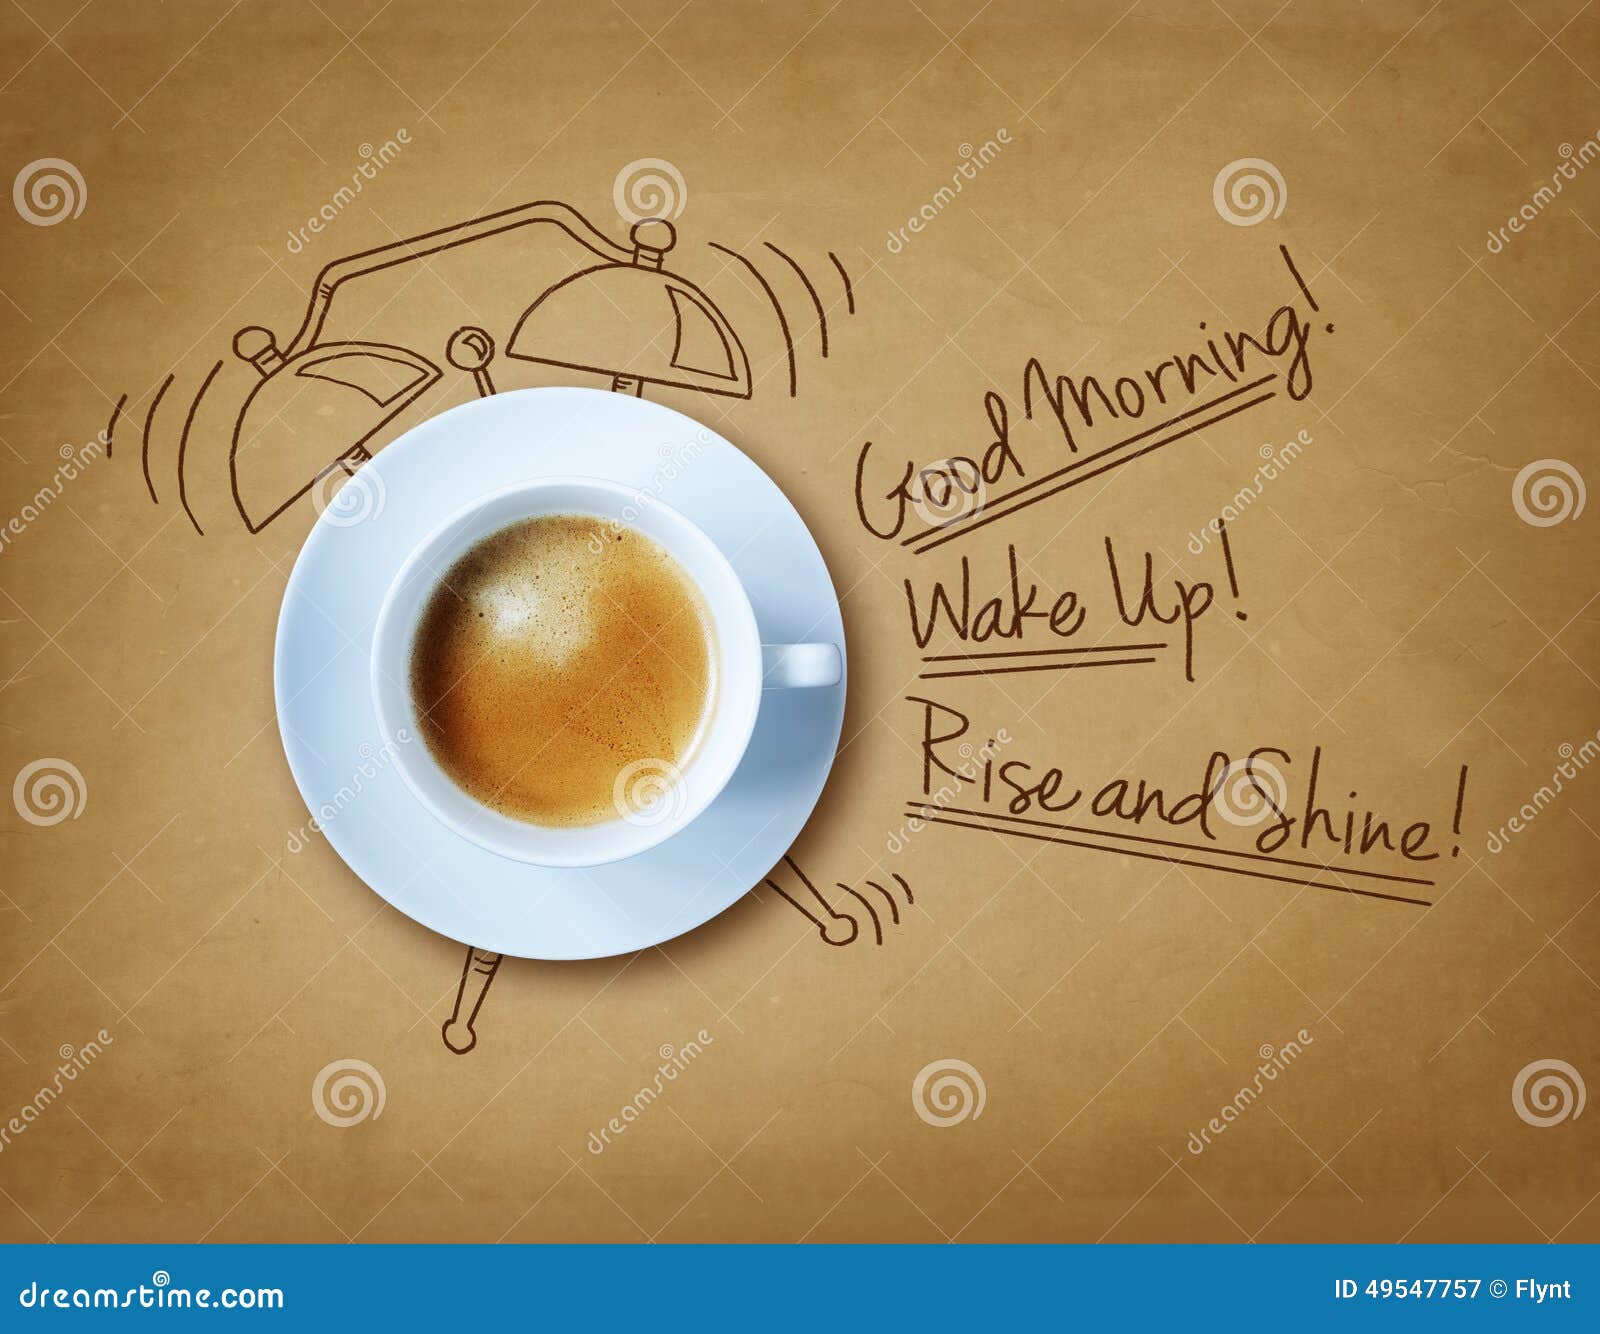 Good morning coffee stock image. Image of happy, dreams - 49547757